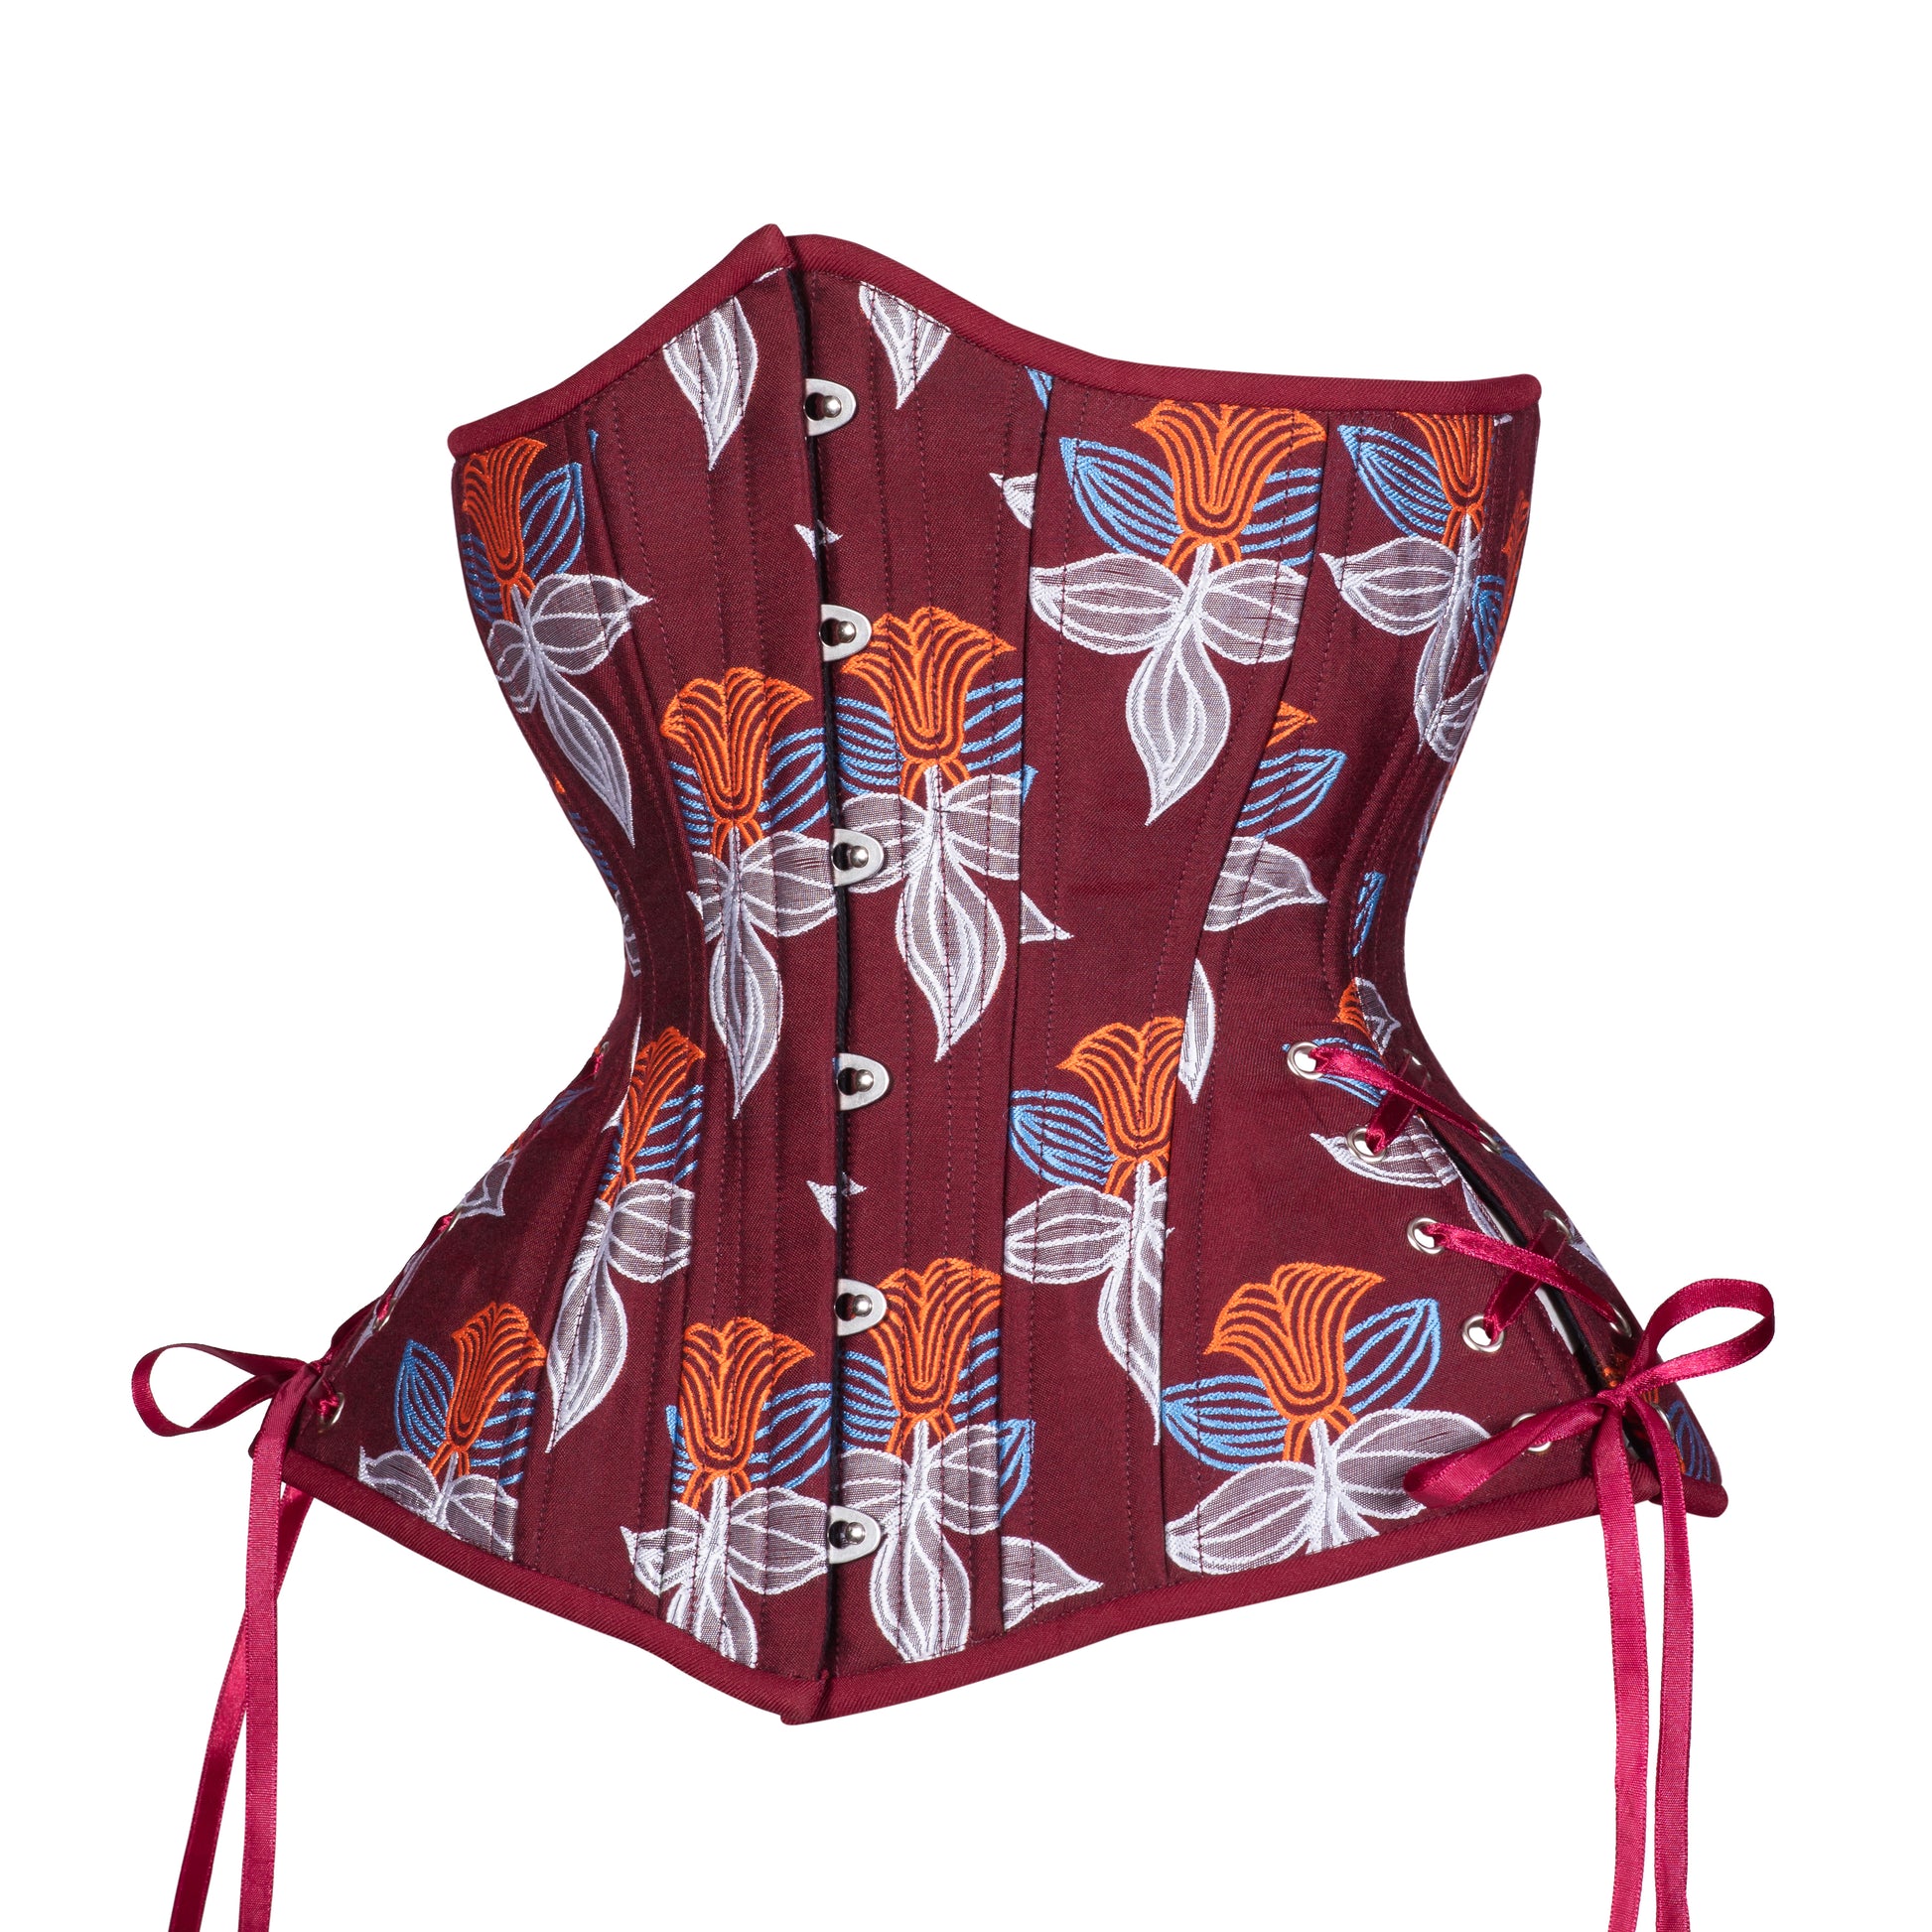 Orchid Corsetry - Who's heard of the S bend corset? It's